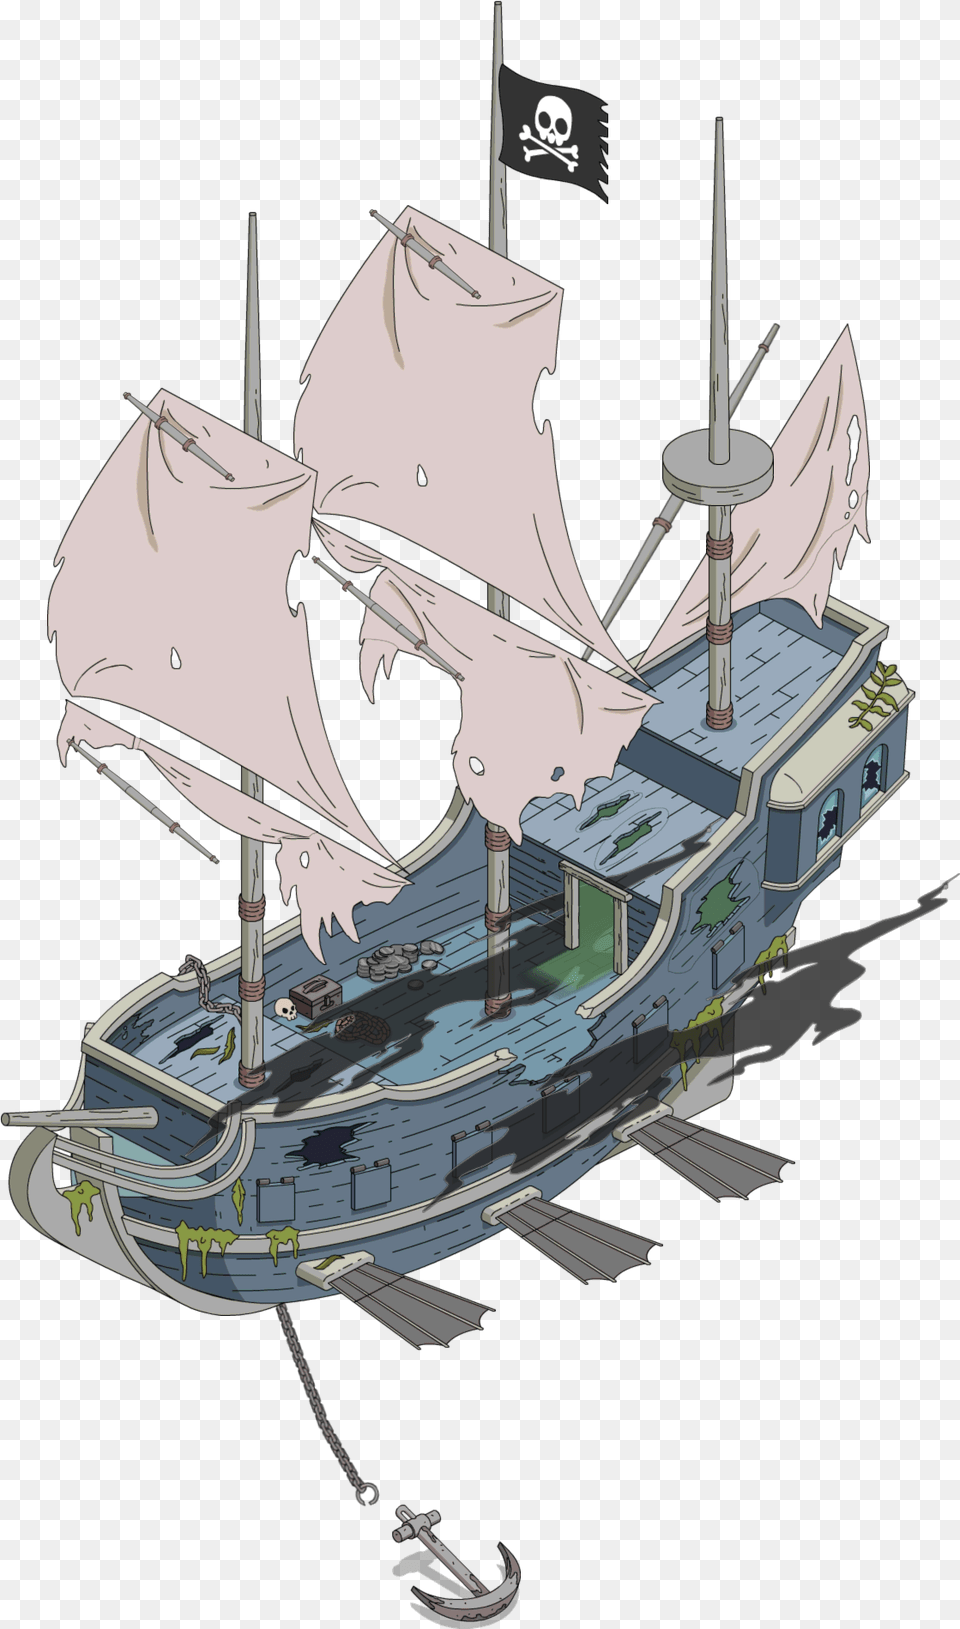 Tapped Out Ghost Pirate Airship Simpsons Tapped Out Boat, Sailboat, Transportation, Vehicle, Cruiser Free Png Download